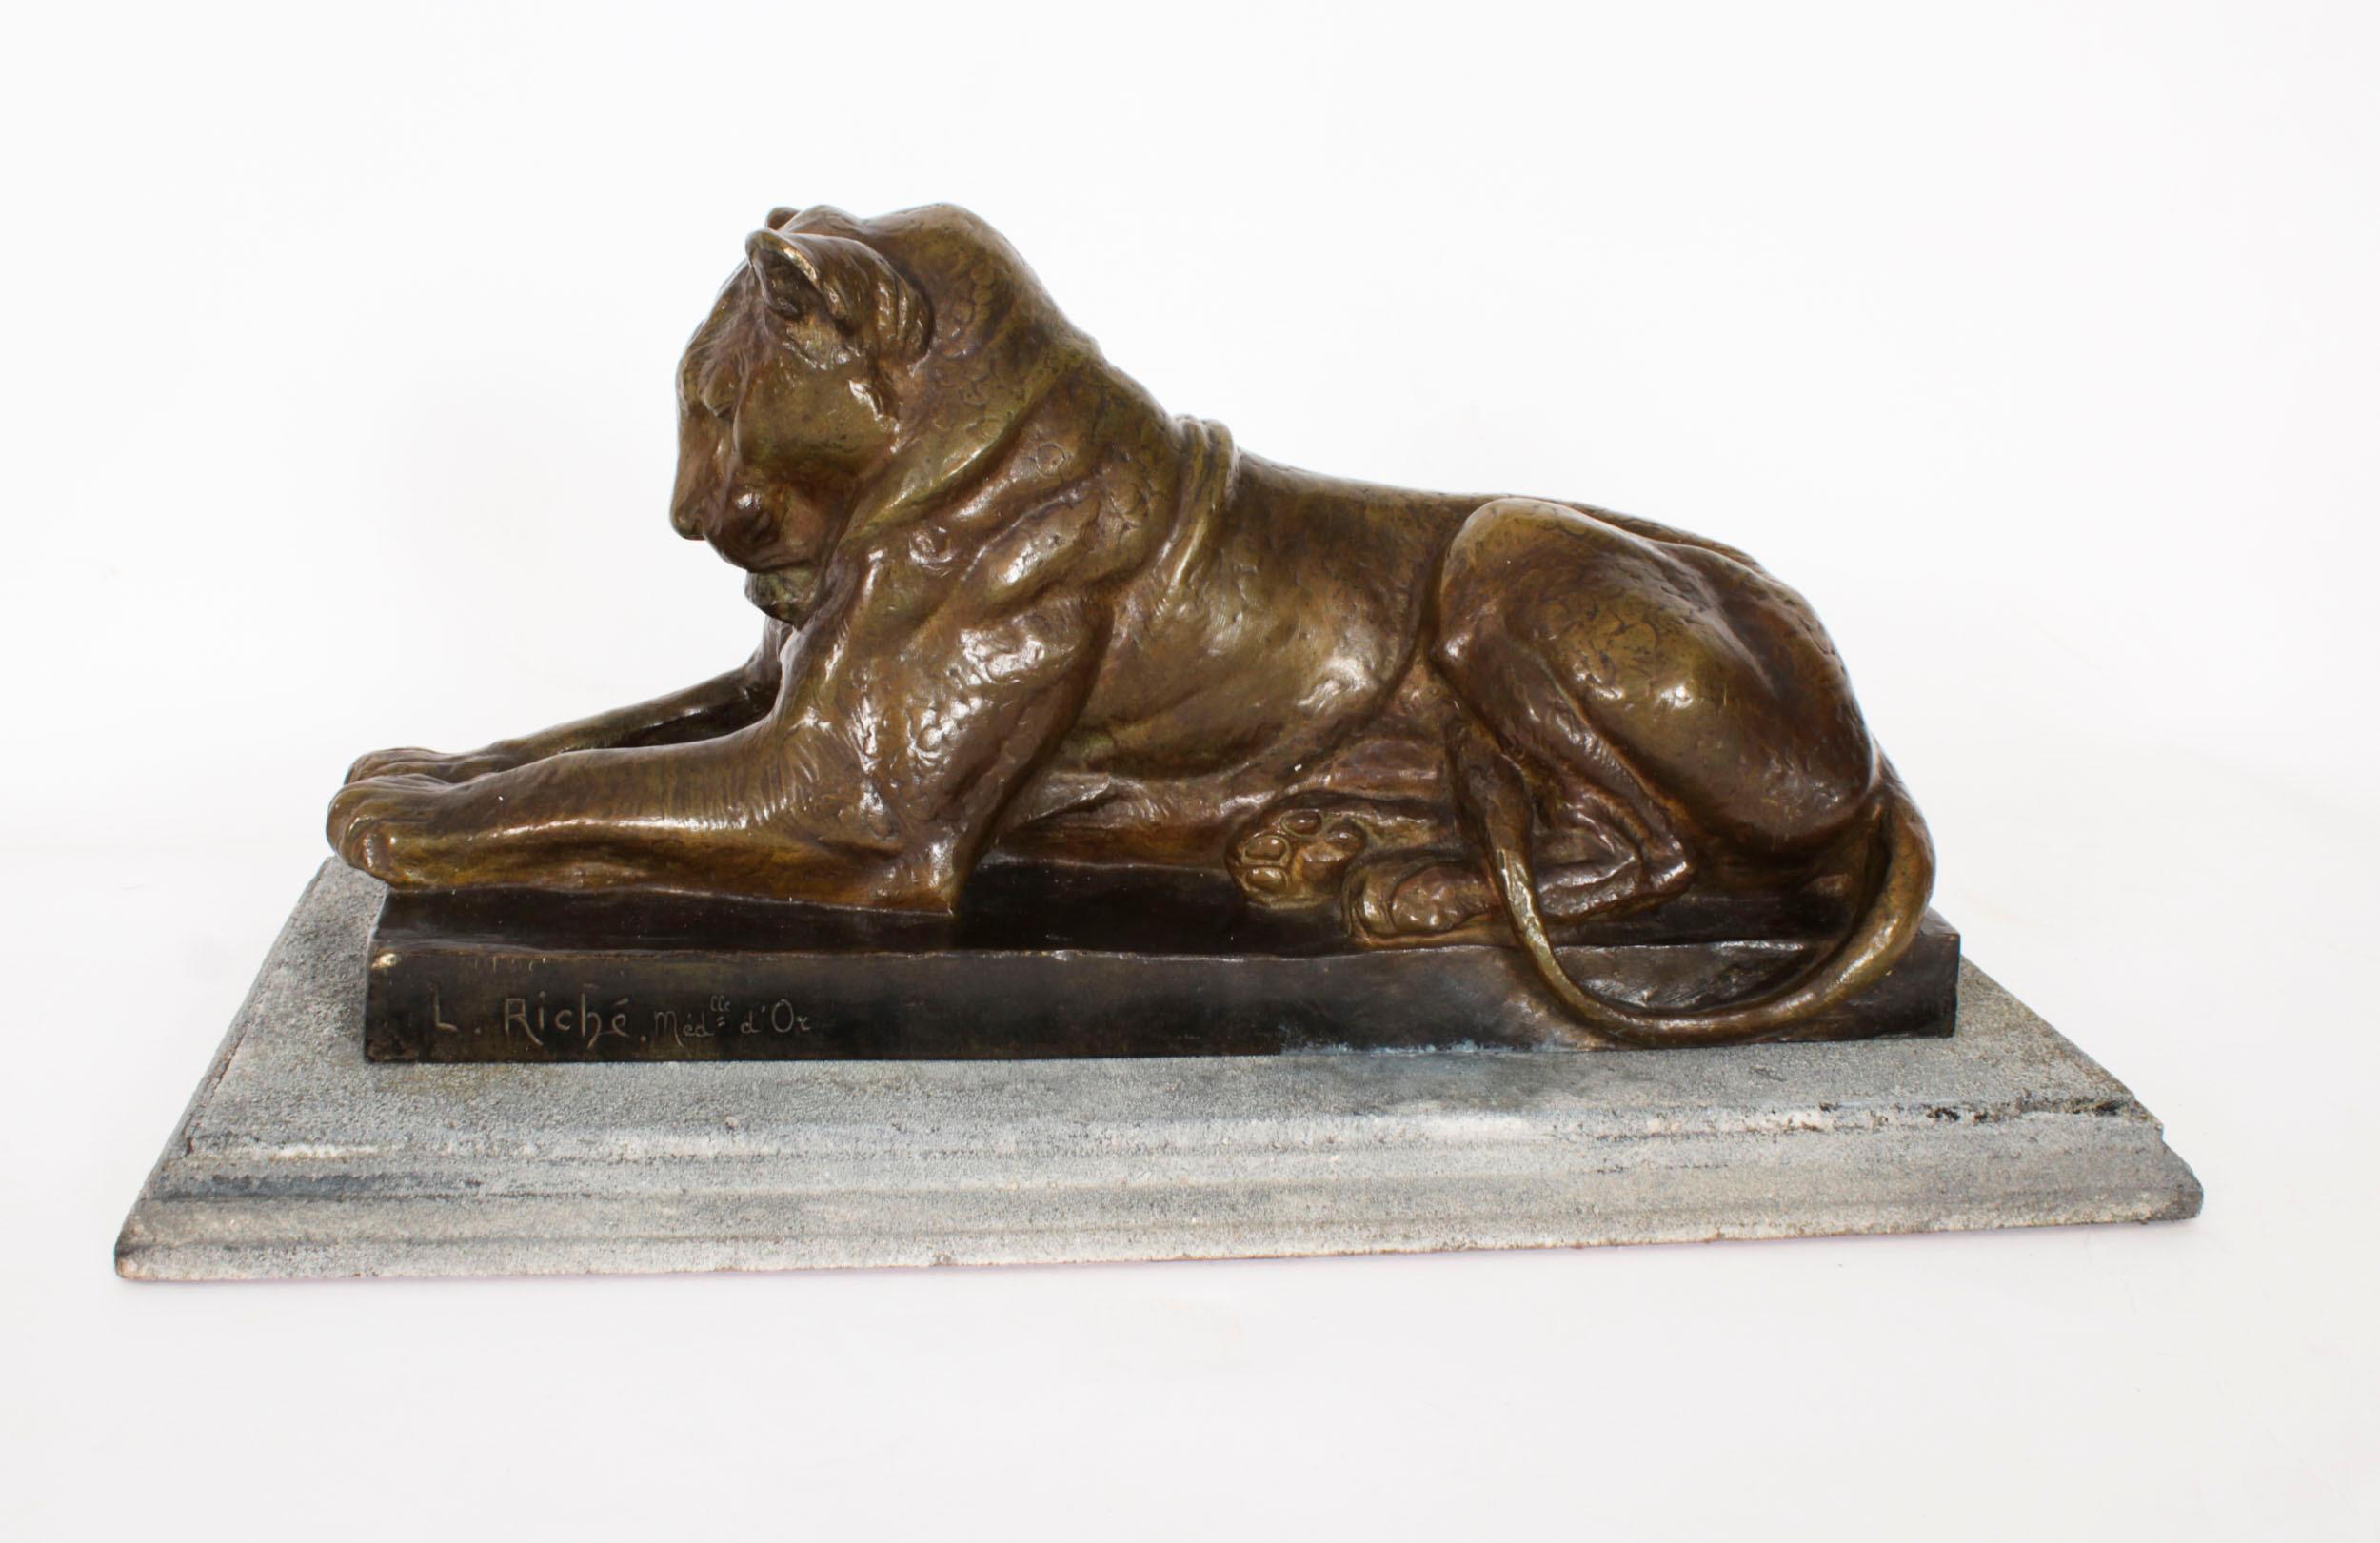 Antique French Bronze Sculpture of Lioness by Louis Riche Early 20th Century For Sale 4